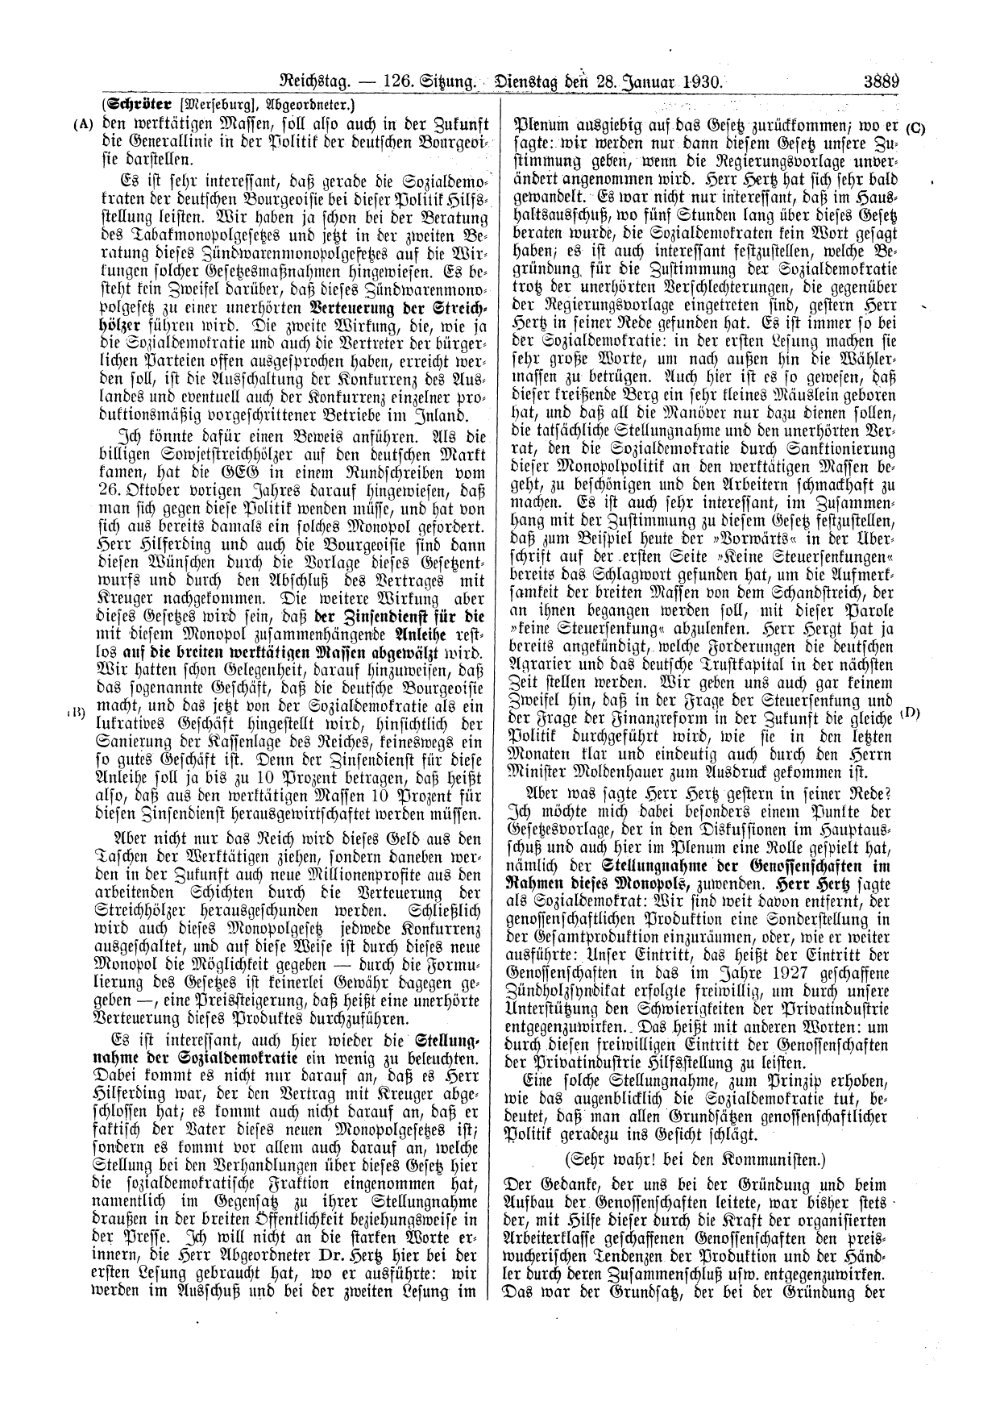 Scan of page 3889